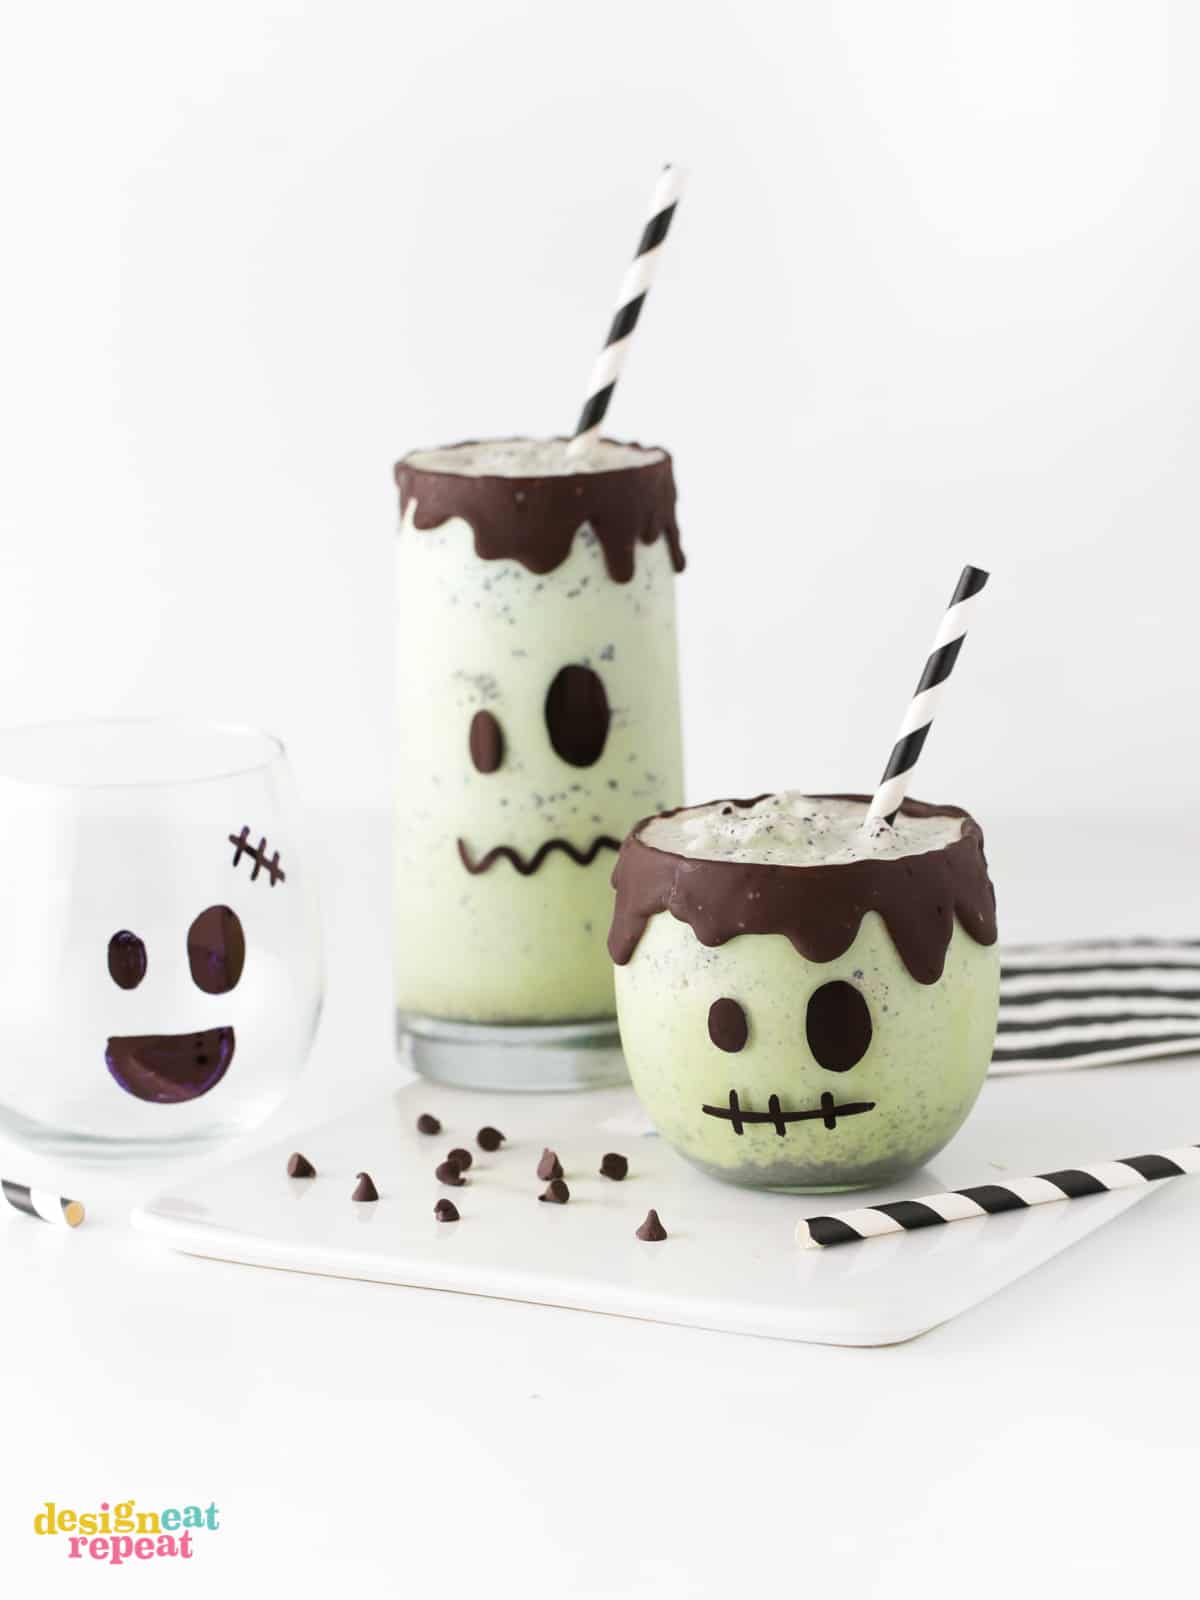 Mint chip green Halloween milkshakes decorated like Frankenstein with chocolate drip rim and striped black paper straws